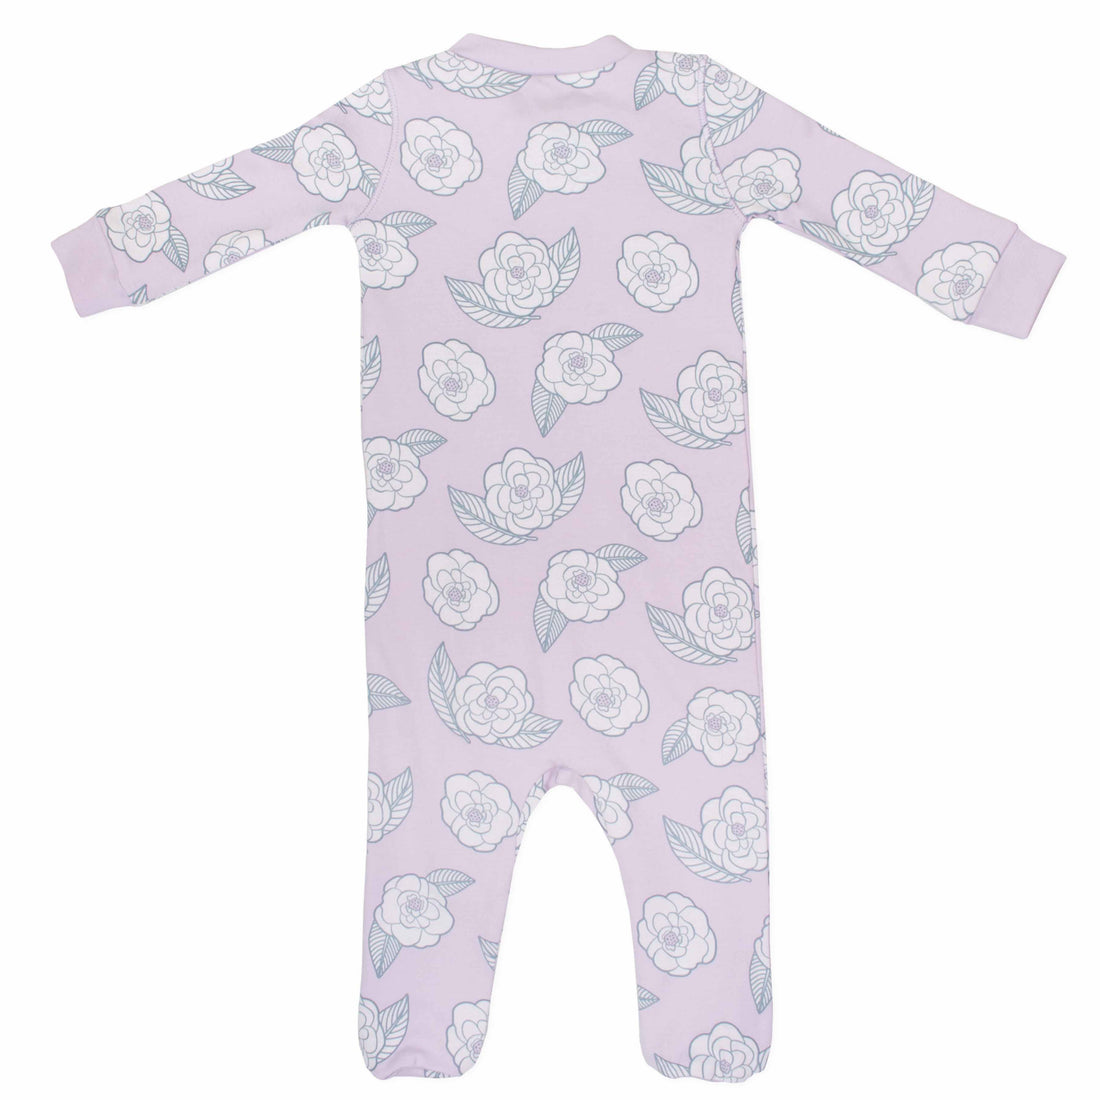 pink footed pajama with camellia flower pattern made in pima cotton - back view